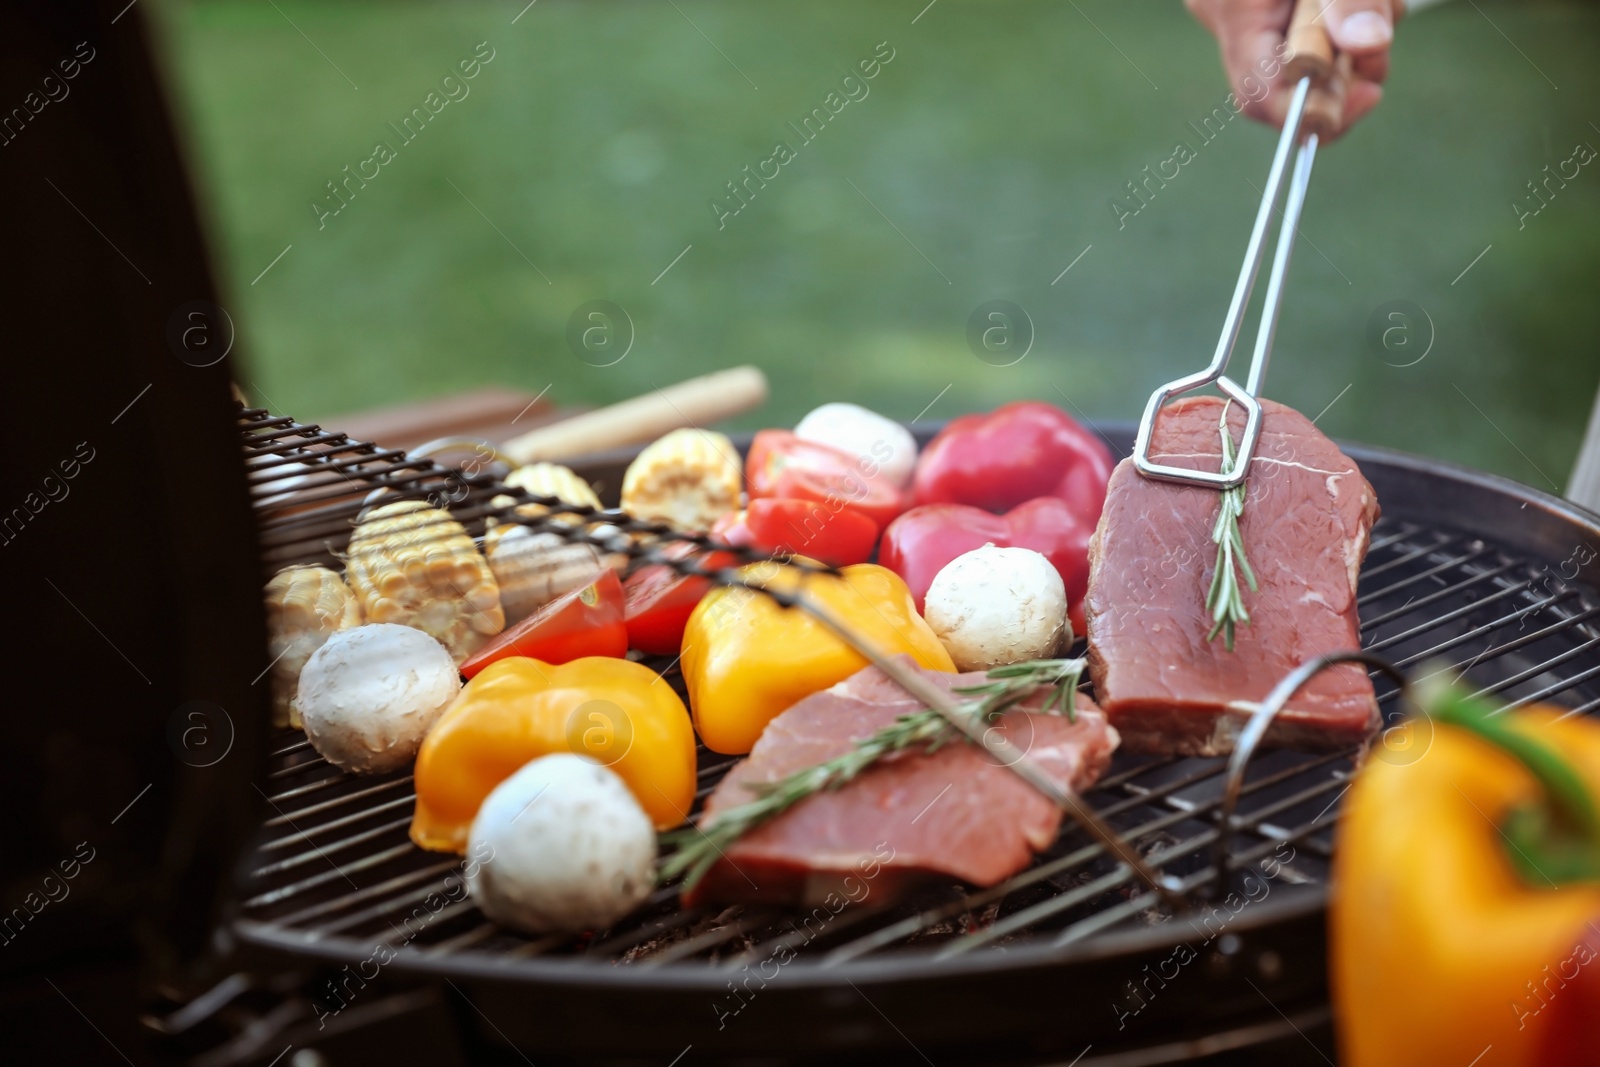 Photo of Man cooking food on barbecue grill outdoors, closeup